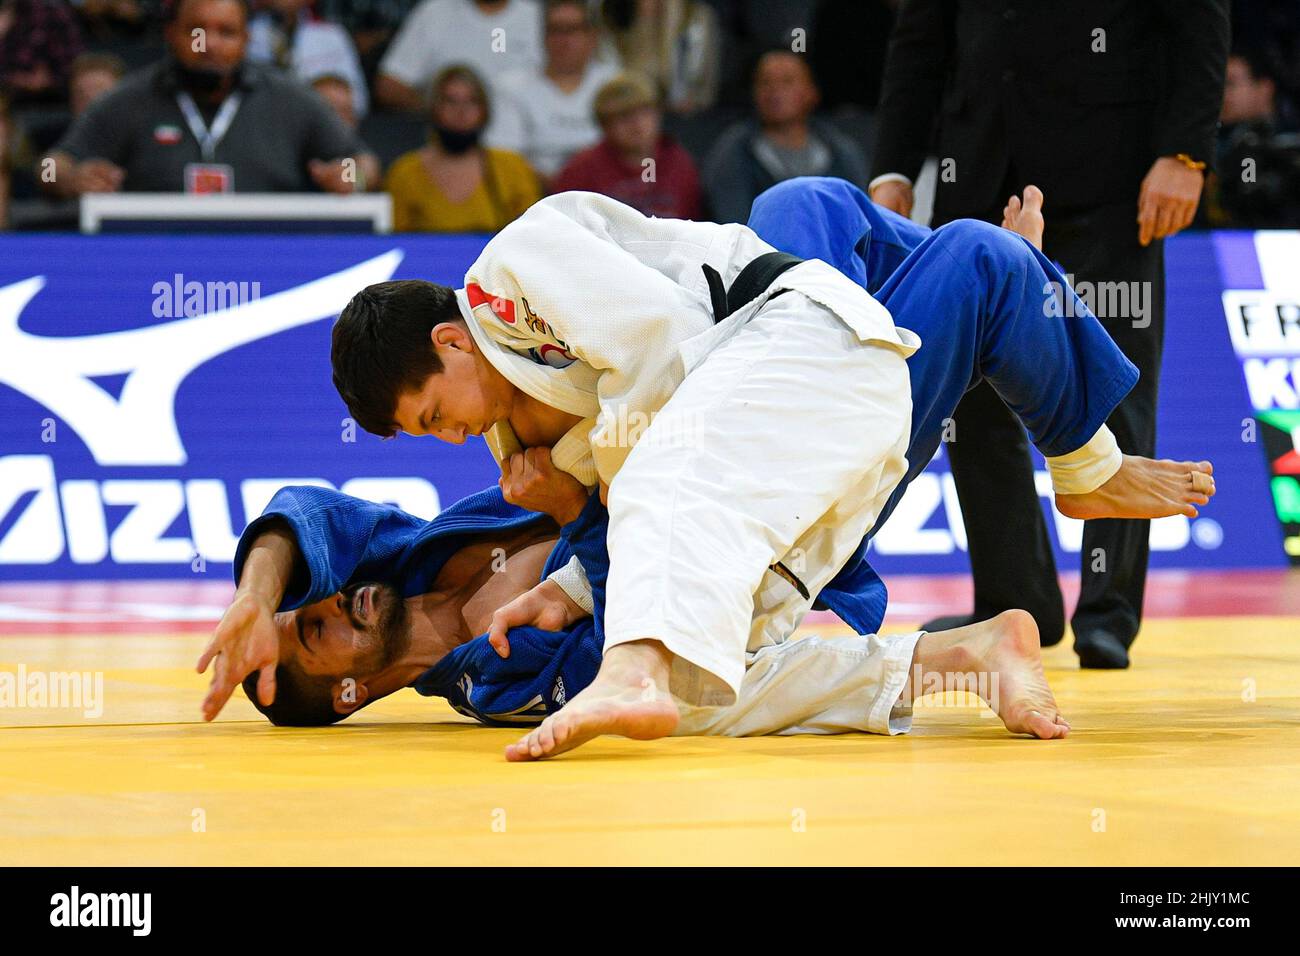 Men -60 kg, Romain VALADIER PICARD of France Bronze medal competes and wins by ippon during the Paris Grand Slam 2021, Judo event on October 16, 2021 Stock Photo